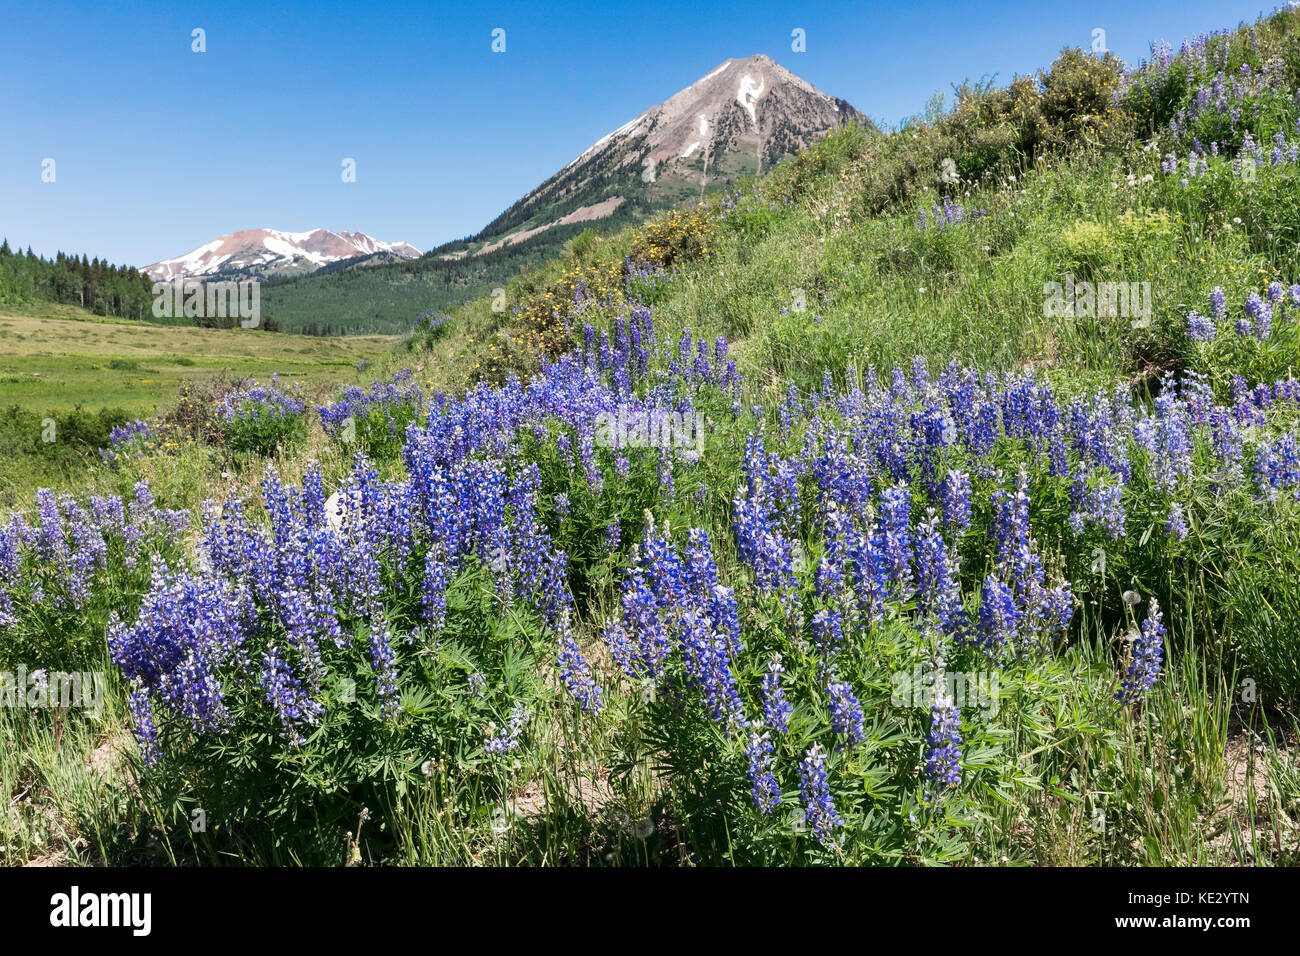 Silvery Lupine (Lupinus argenteus) covers the foothills of the Rocky Mountains, Colorado, USA. Stock Photo